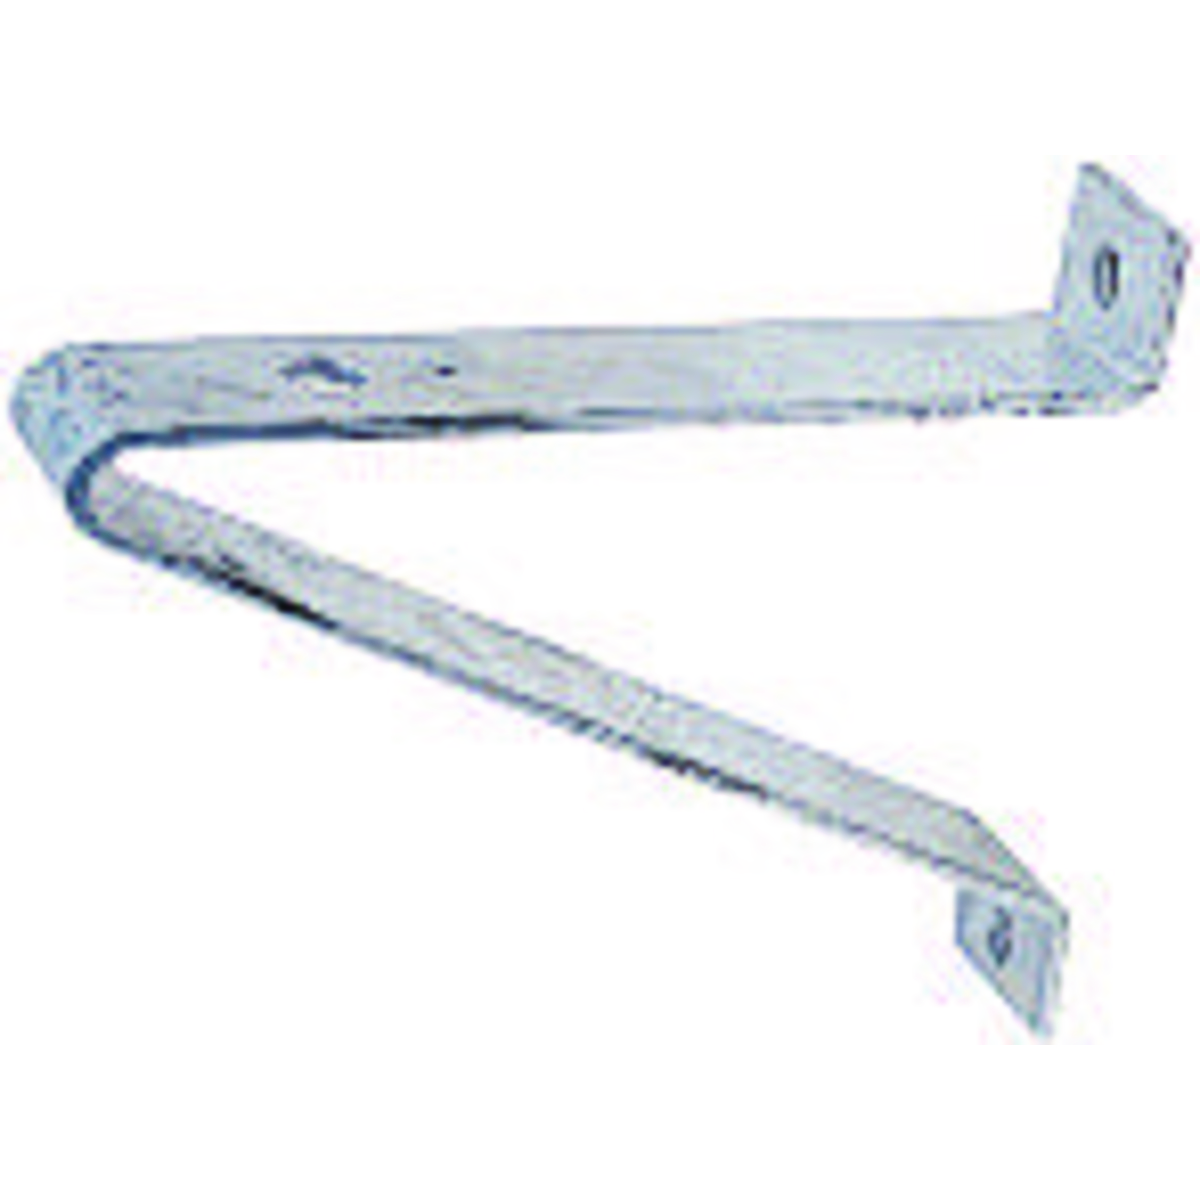 KFSS SERIES - HOT-DIPPED GALVANIZED STEEL WALL/POLE BRACKET (BOLTSINCLUDED)